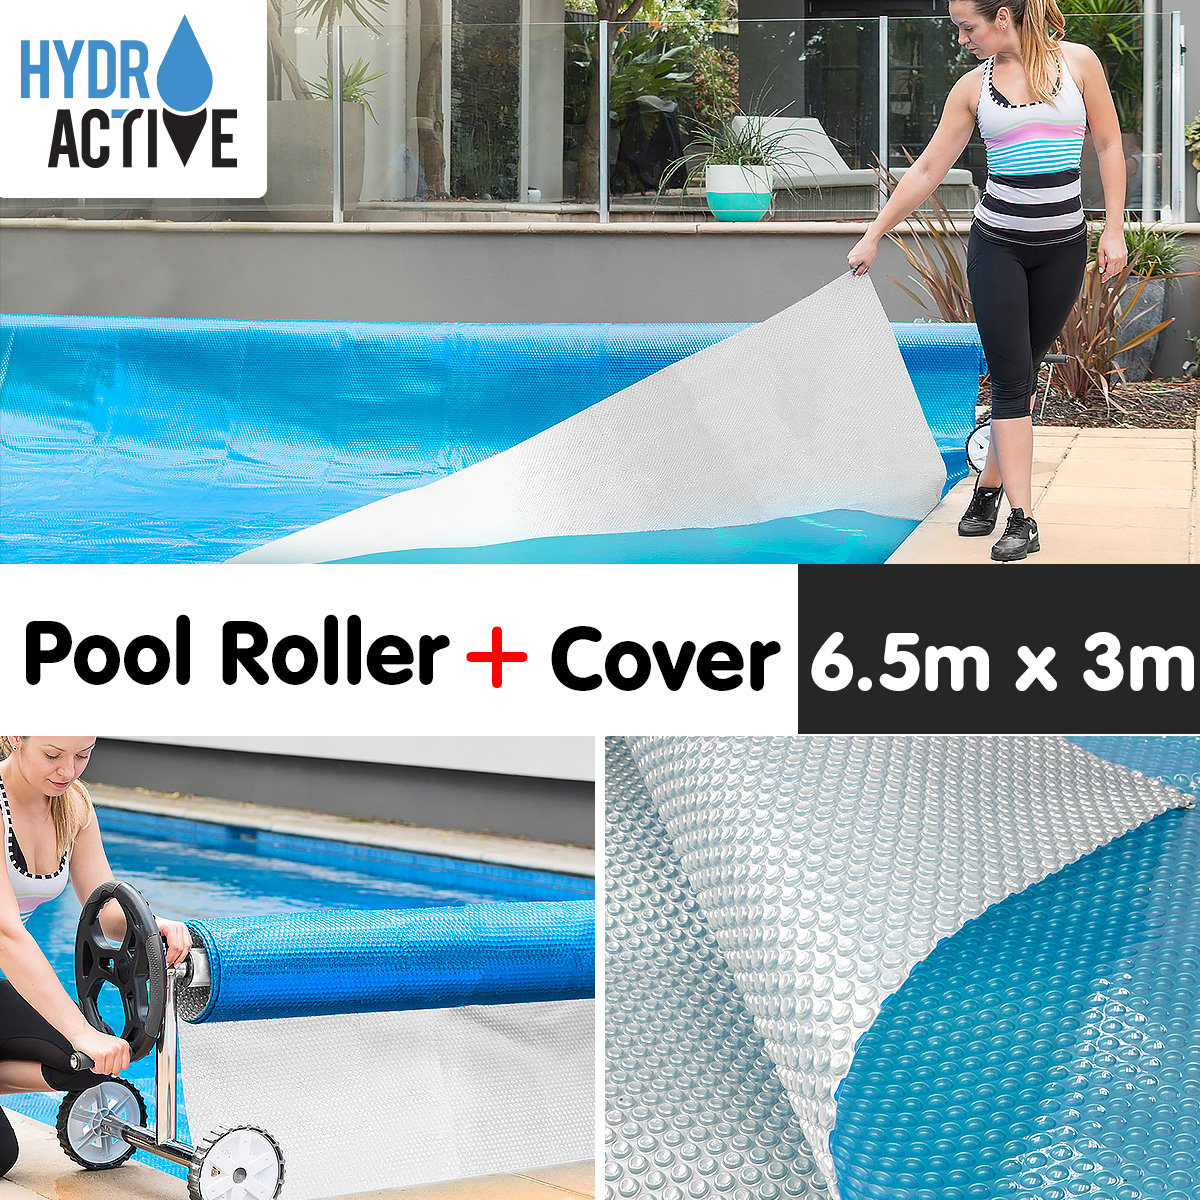 400micron Swimming Pool Roller Cover Combo - Silver/Blue - 6.5m x 3m 1